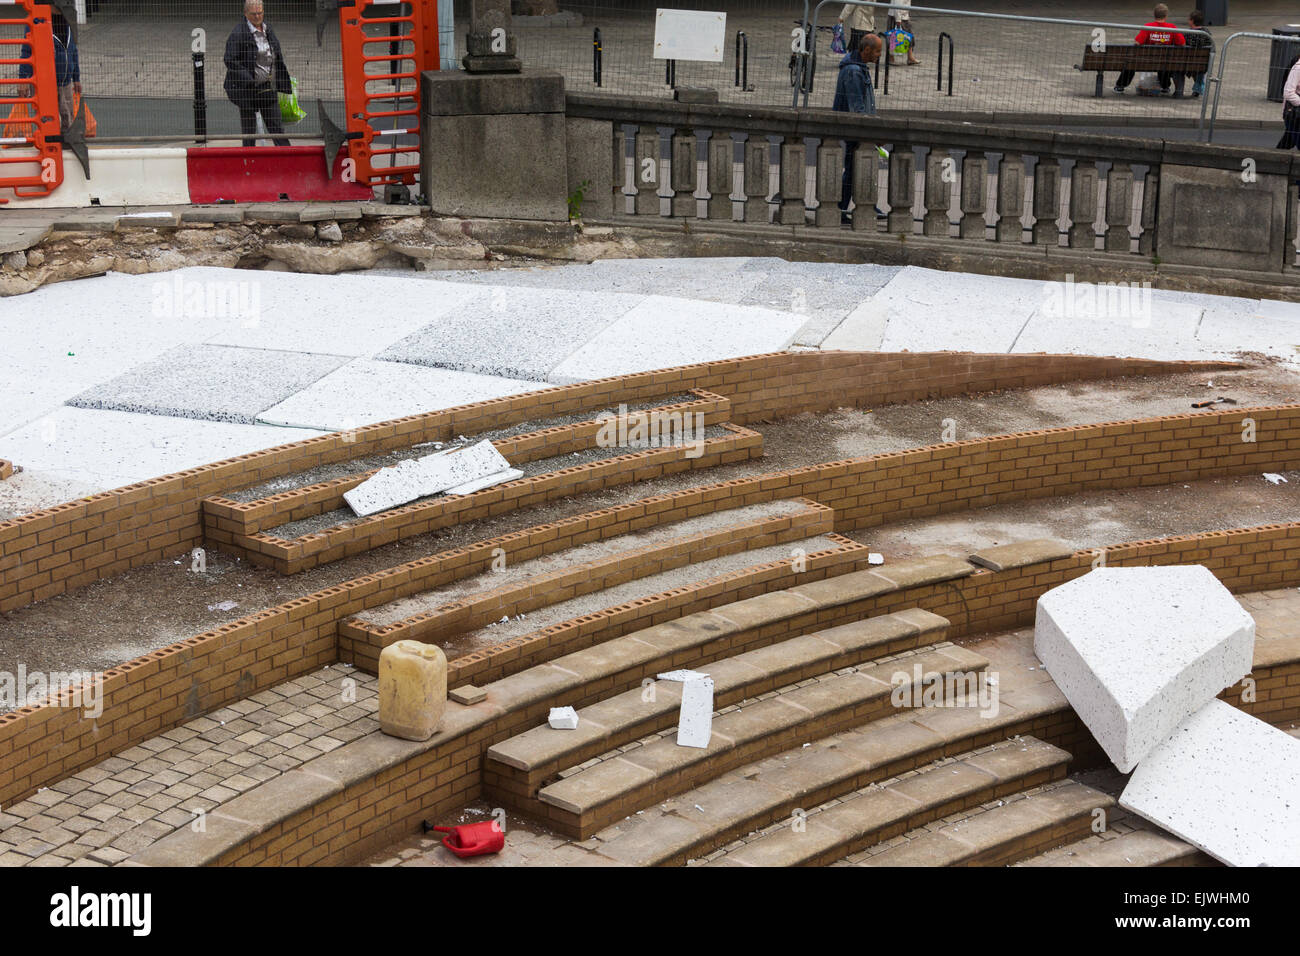 Geofoam expanded polystyrene blocks being used as a fill material in the construction of stepped plaza in Stockport town centre. Stock Photo